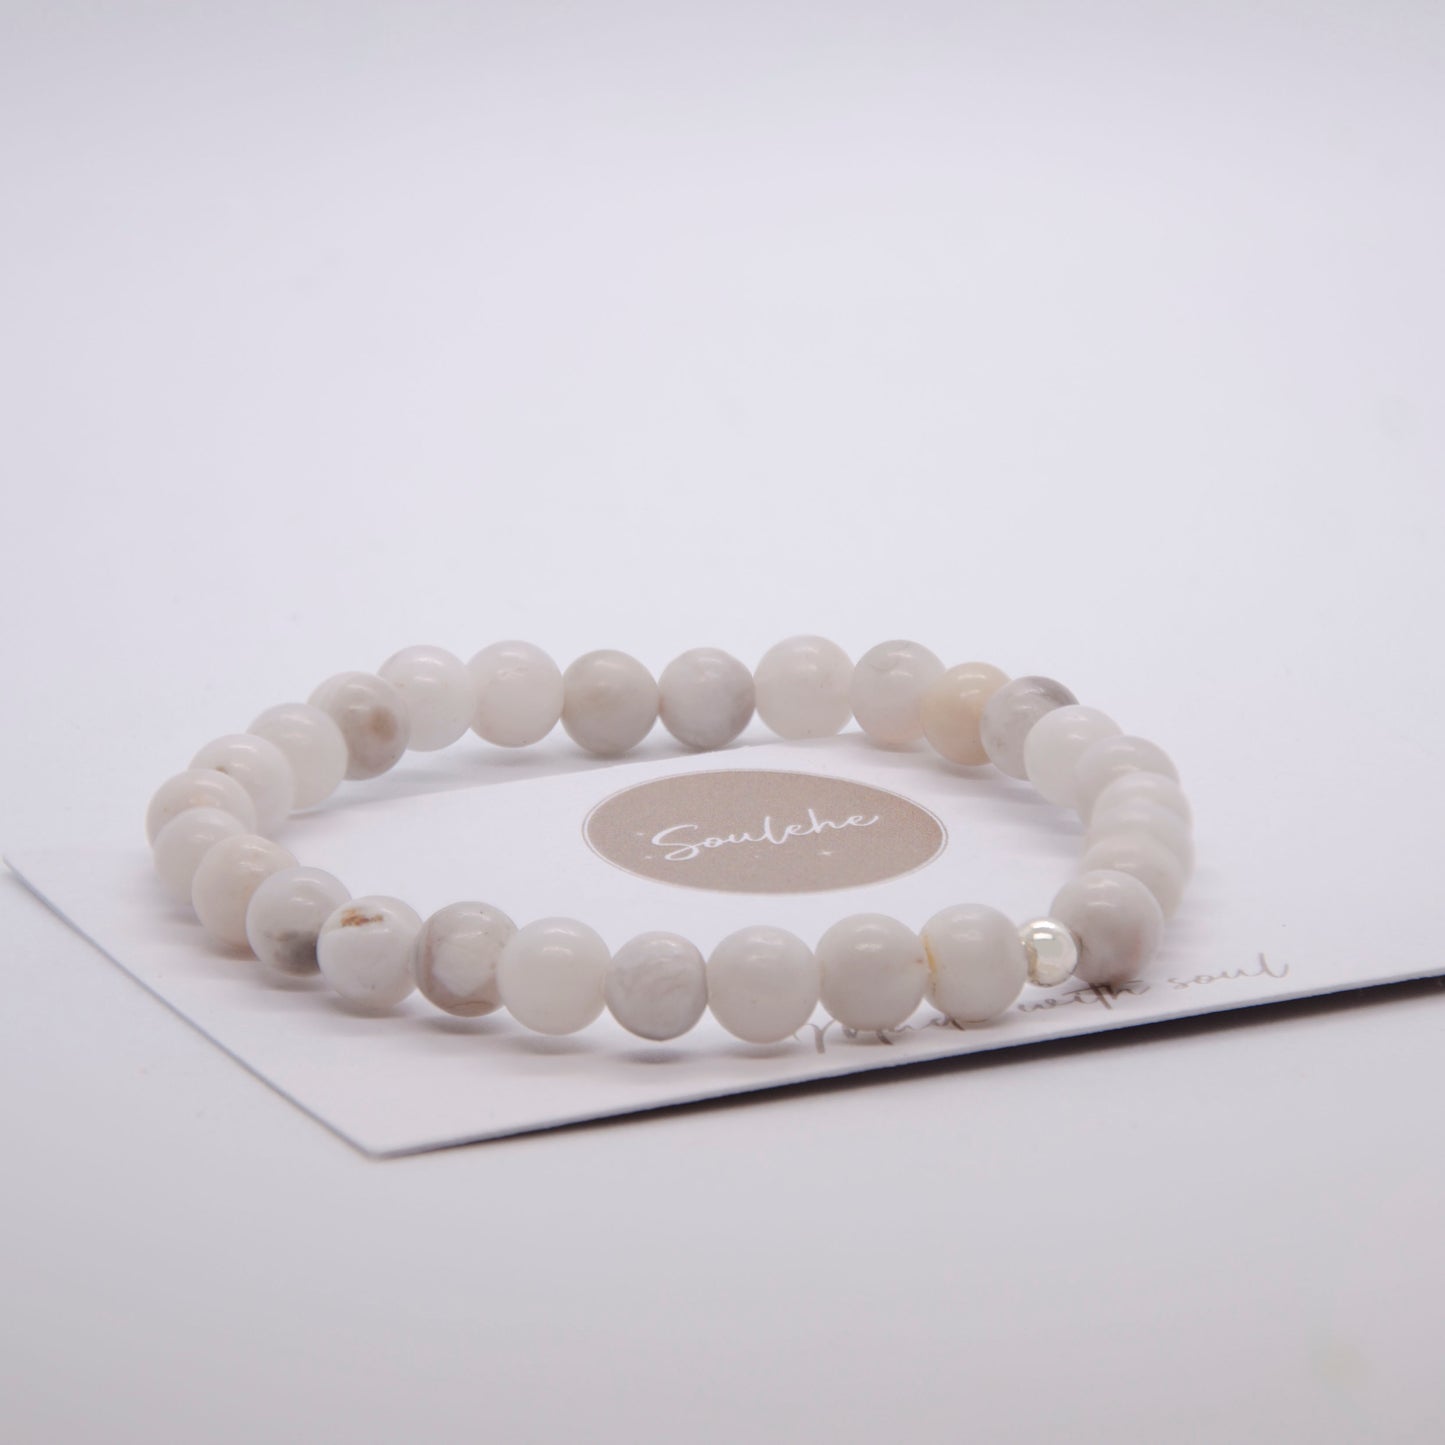 Balance x Booster • Matte White Agate & 925 Sterling Silver